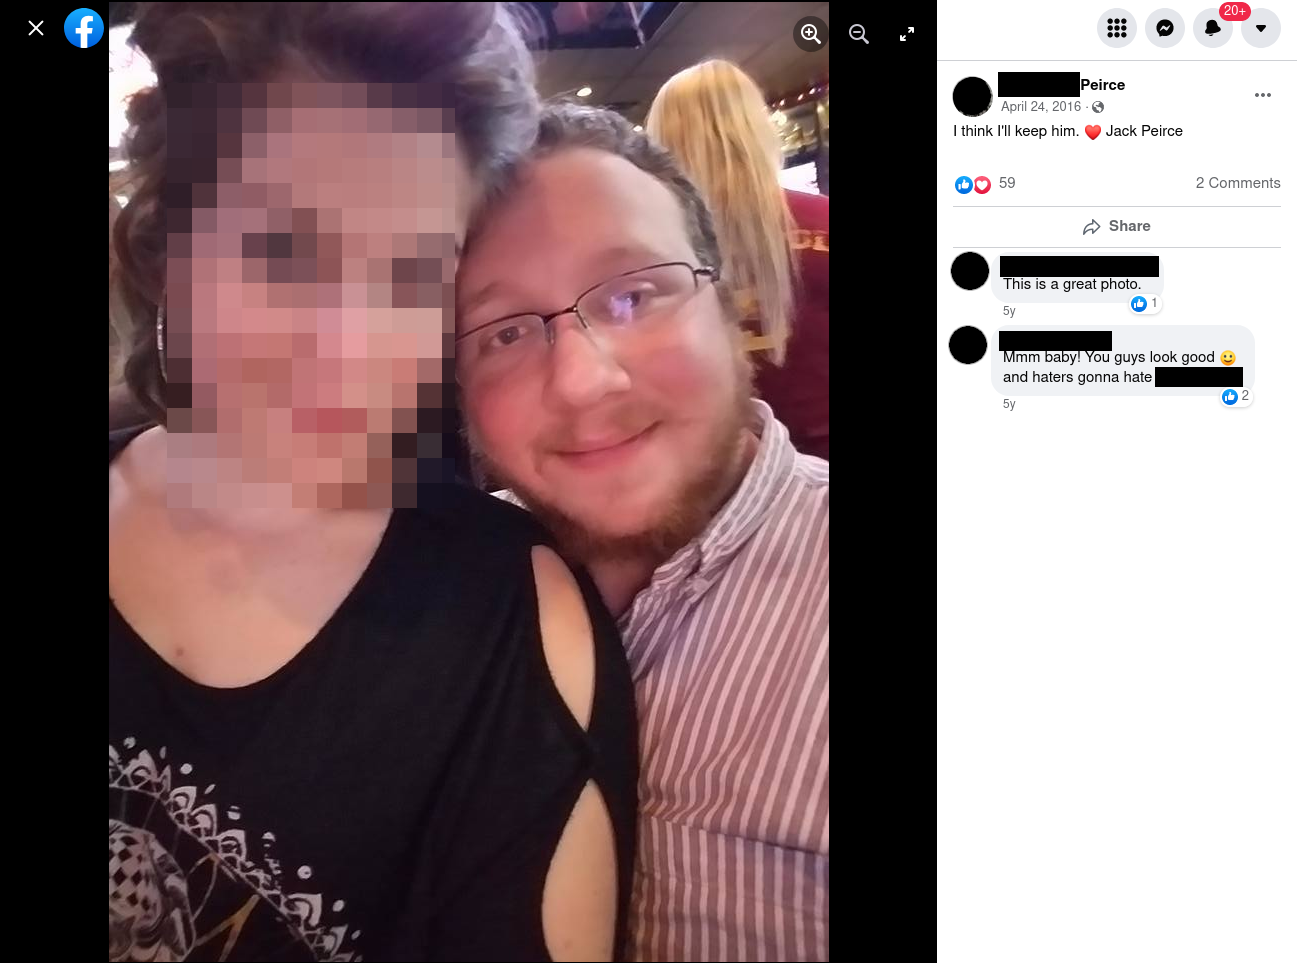 Facebook photo of Allison R. Peirce IV with now-wife. They have been together since at least 2016.